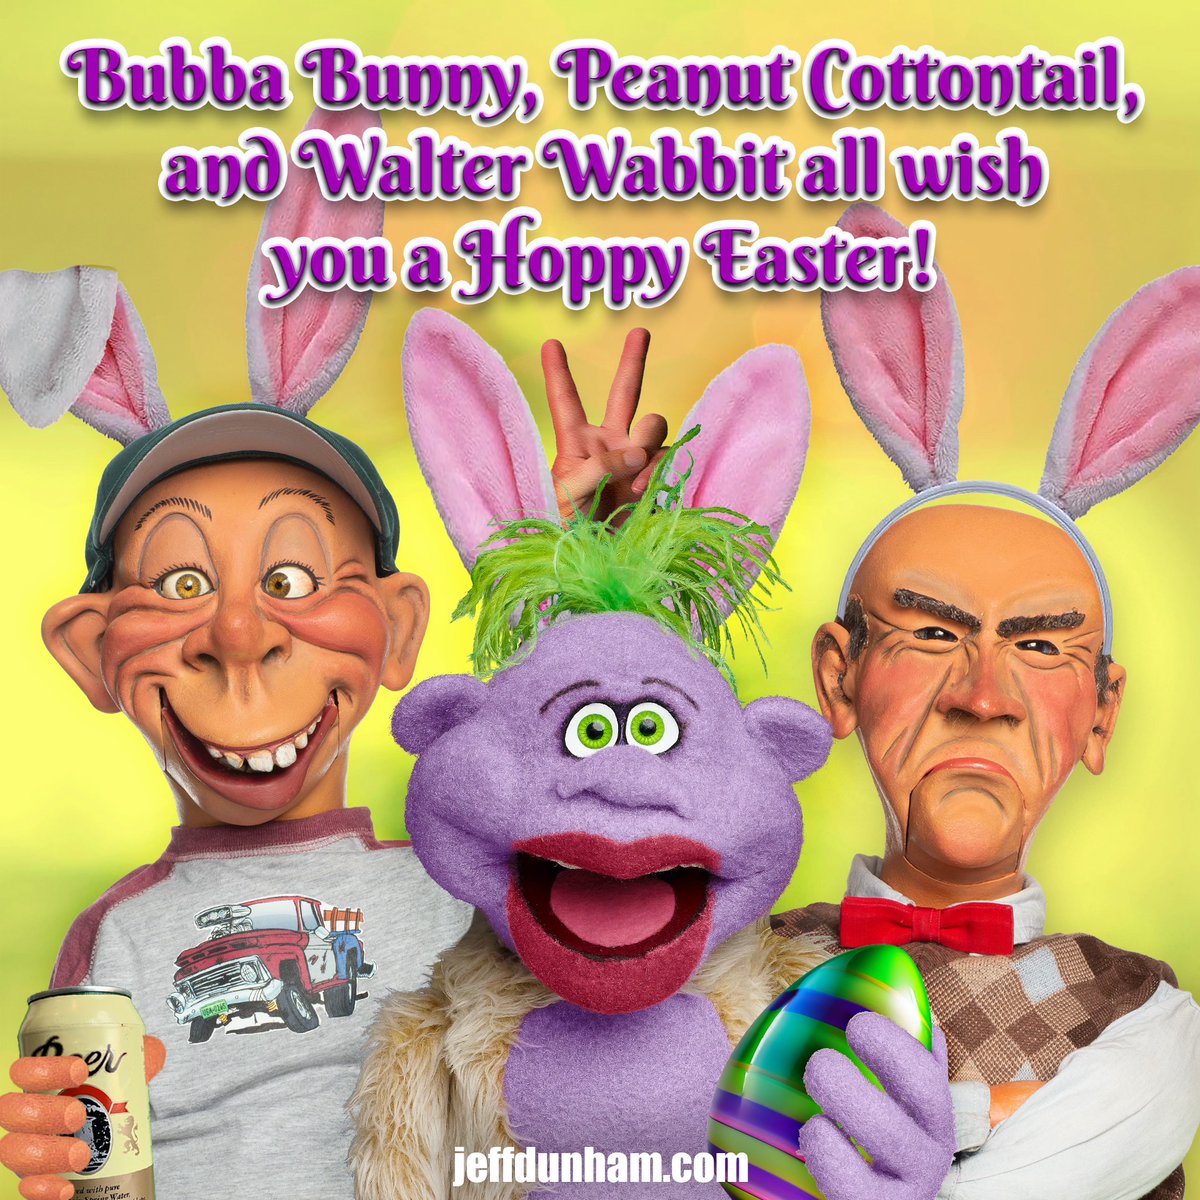 Easter is ALMOST HERE, and the bunnies… uh, guys, are bright-eyed, bushy tailed, and READY to throw some eggs! I mean HUNT… some eggs! Eat lots of candy and HOP to see you at one of our tour dates SOON! Have a happy Easter! #JeffDunham #Easter #EasterBunny #EasterEggs #Comedy